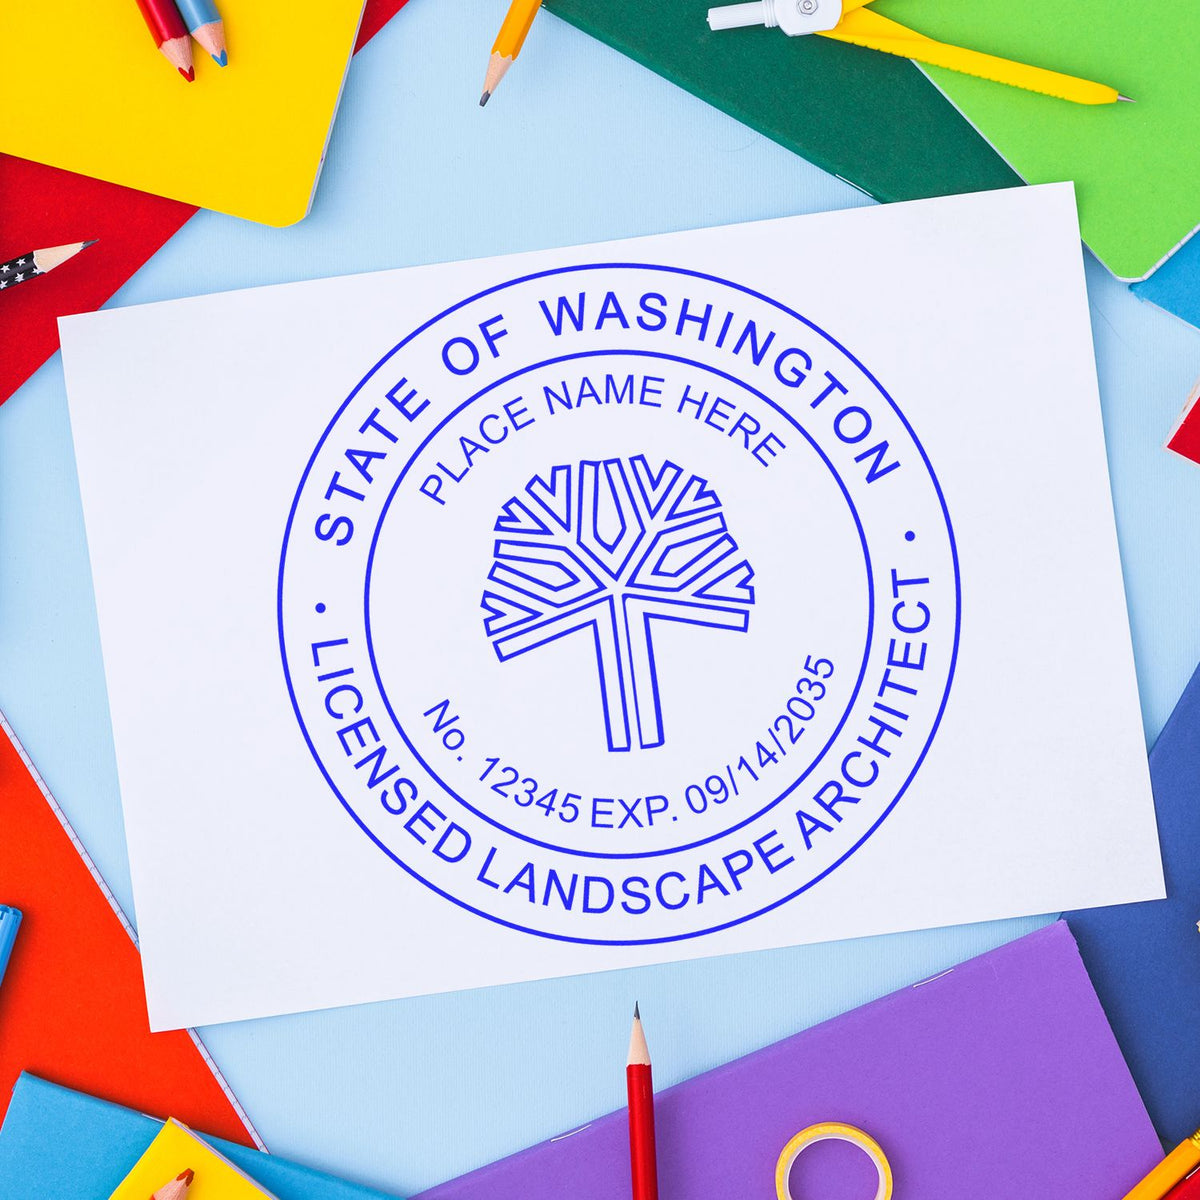 This paper is stamped with a sample imprint of the Self-Inking Washington Landscape Architect Stamp, signifying its quality and reliability.